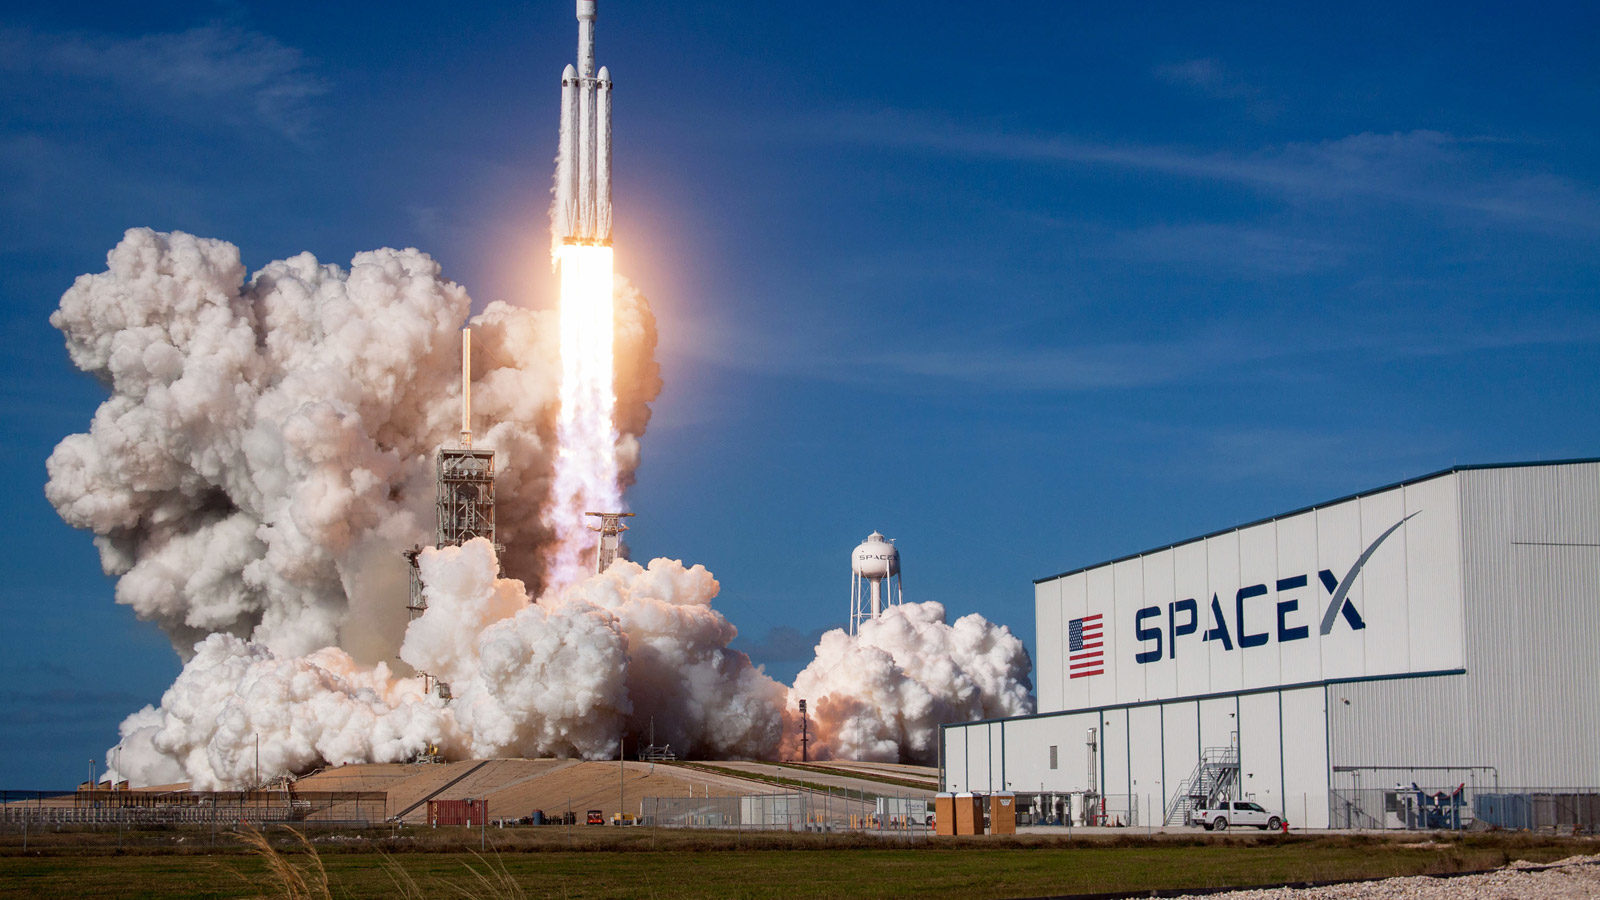 SpaceX Accepts Dogecoin As Payment To Launch “DOGE1 Mission To The